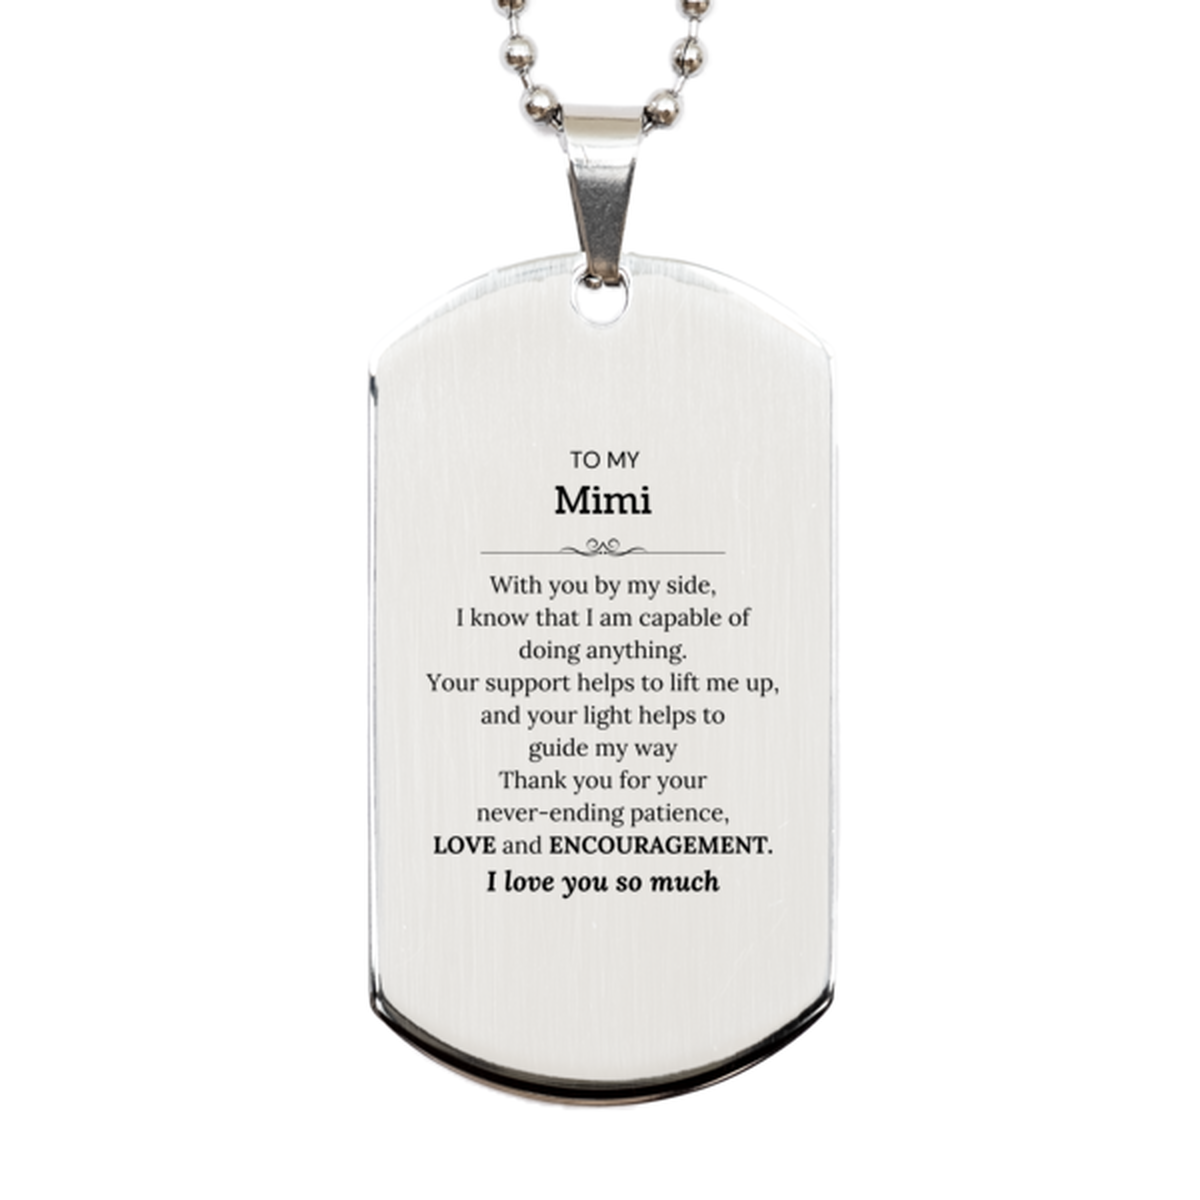 Appreciation Mimi Silver Dog Tag Gifts, To My Mimi Birthday Christmas Wedding Keepsake Gifts for Mimi With you by my side, I know that I am capable of doing anything. I love you so much